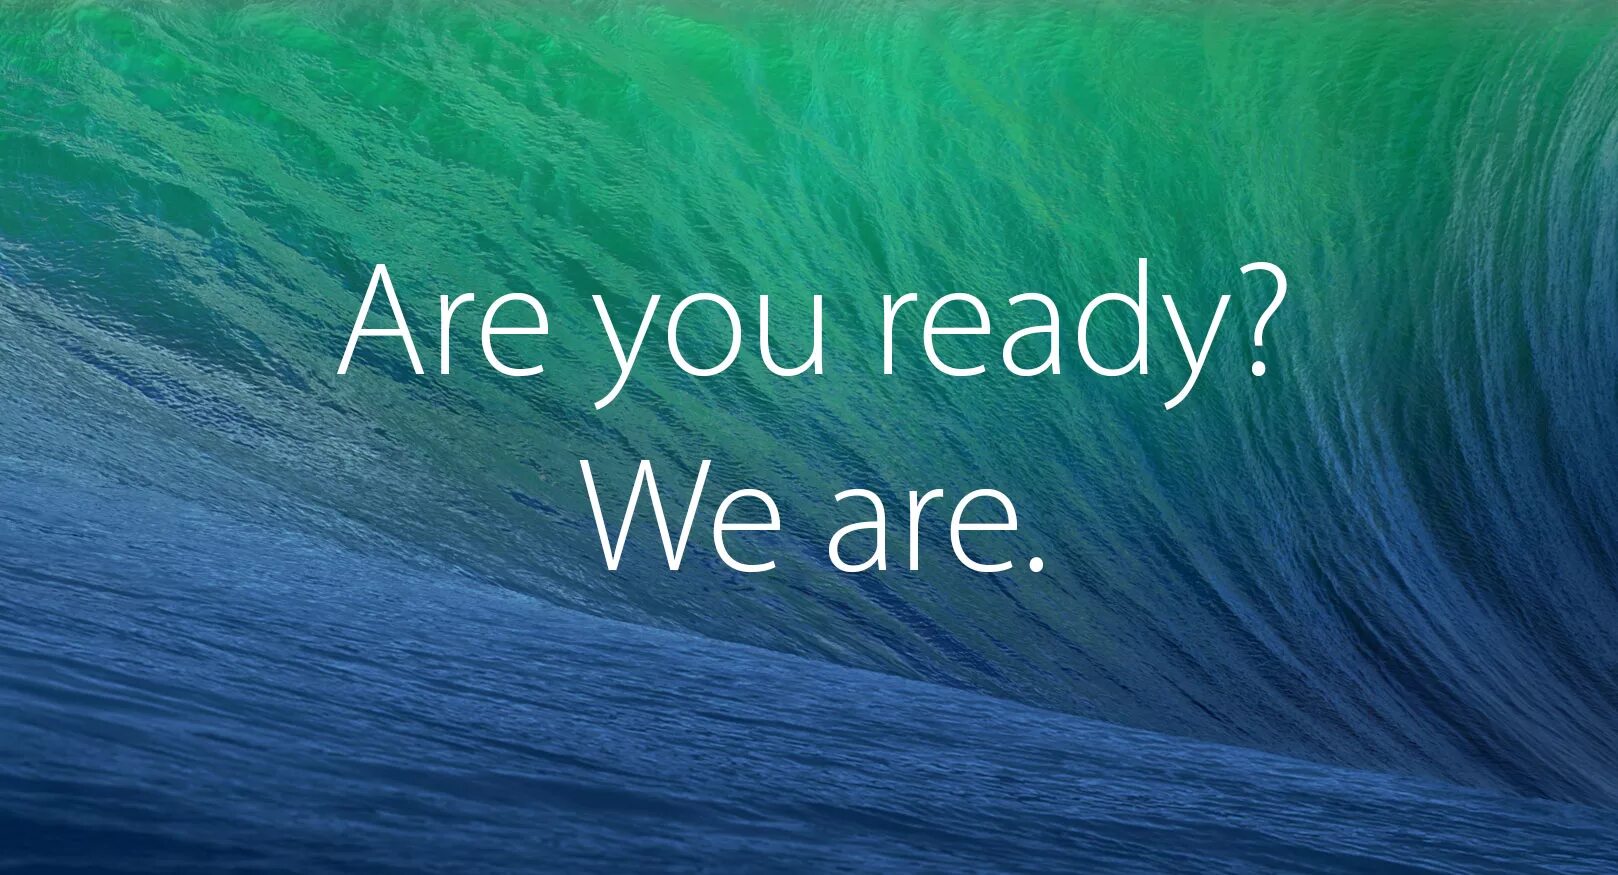 Are you ready. Os x Mavericks обои. Are you ready картинка. Are you ready ? Фото. Are you ready to order ordering